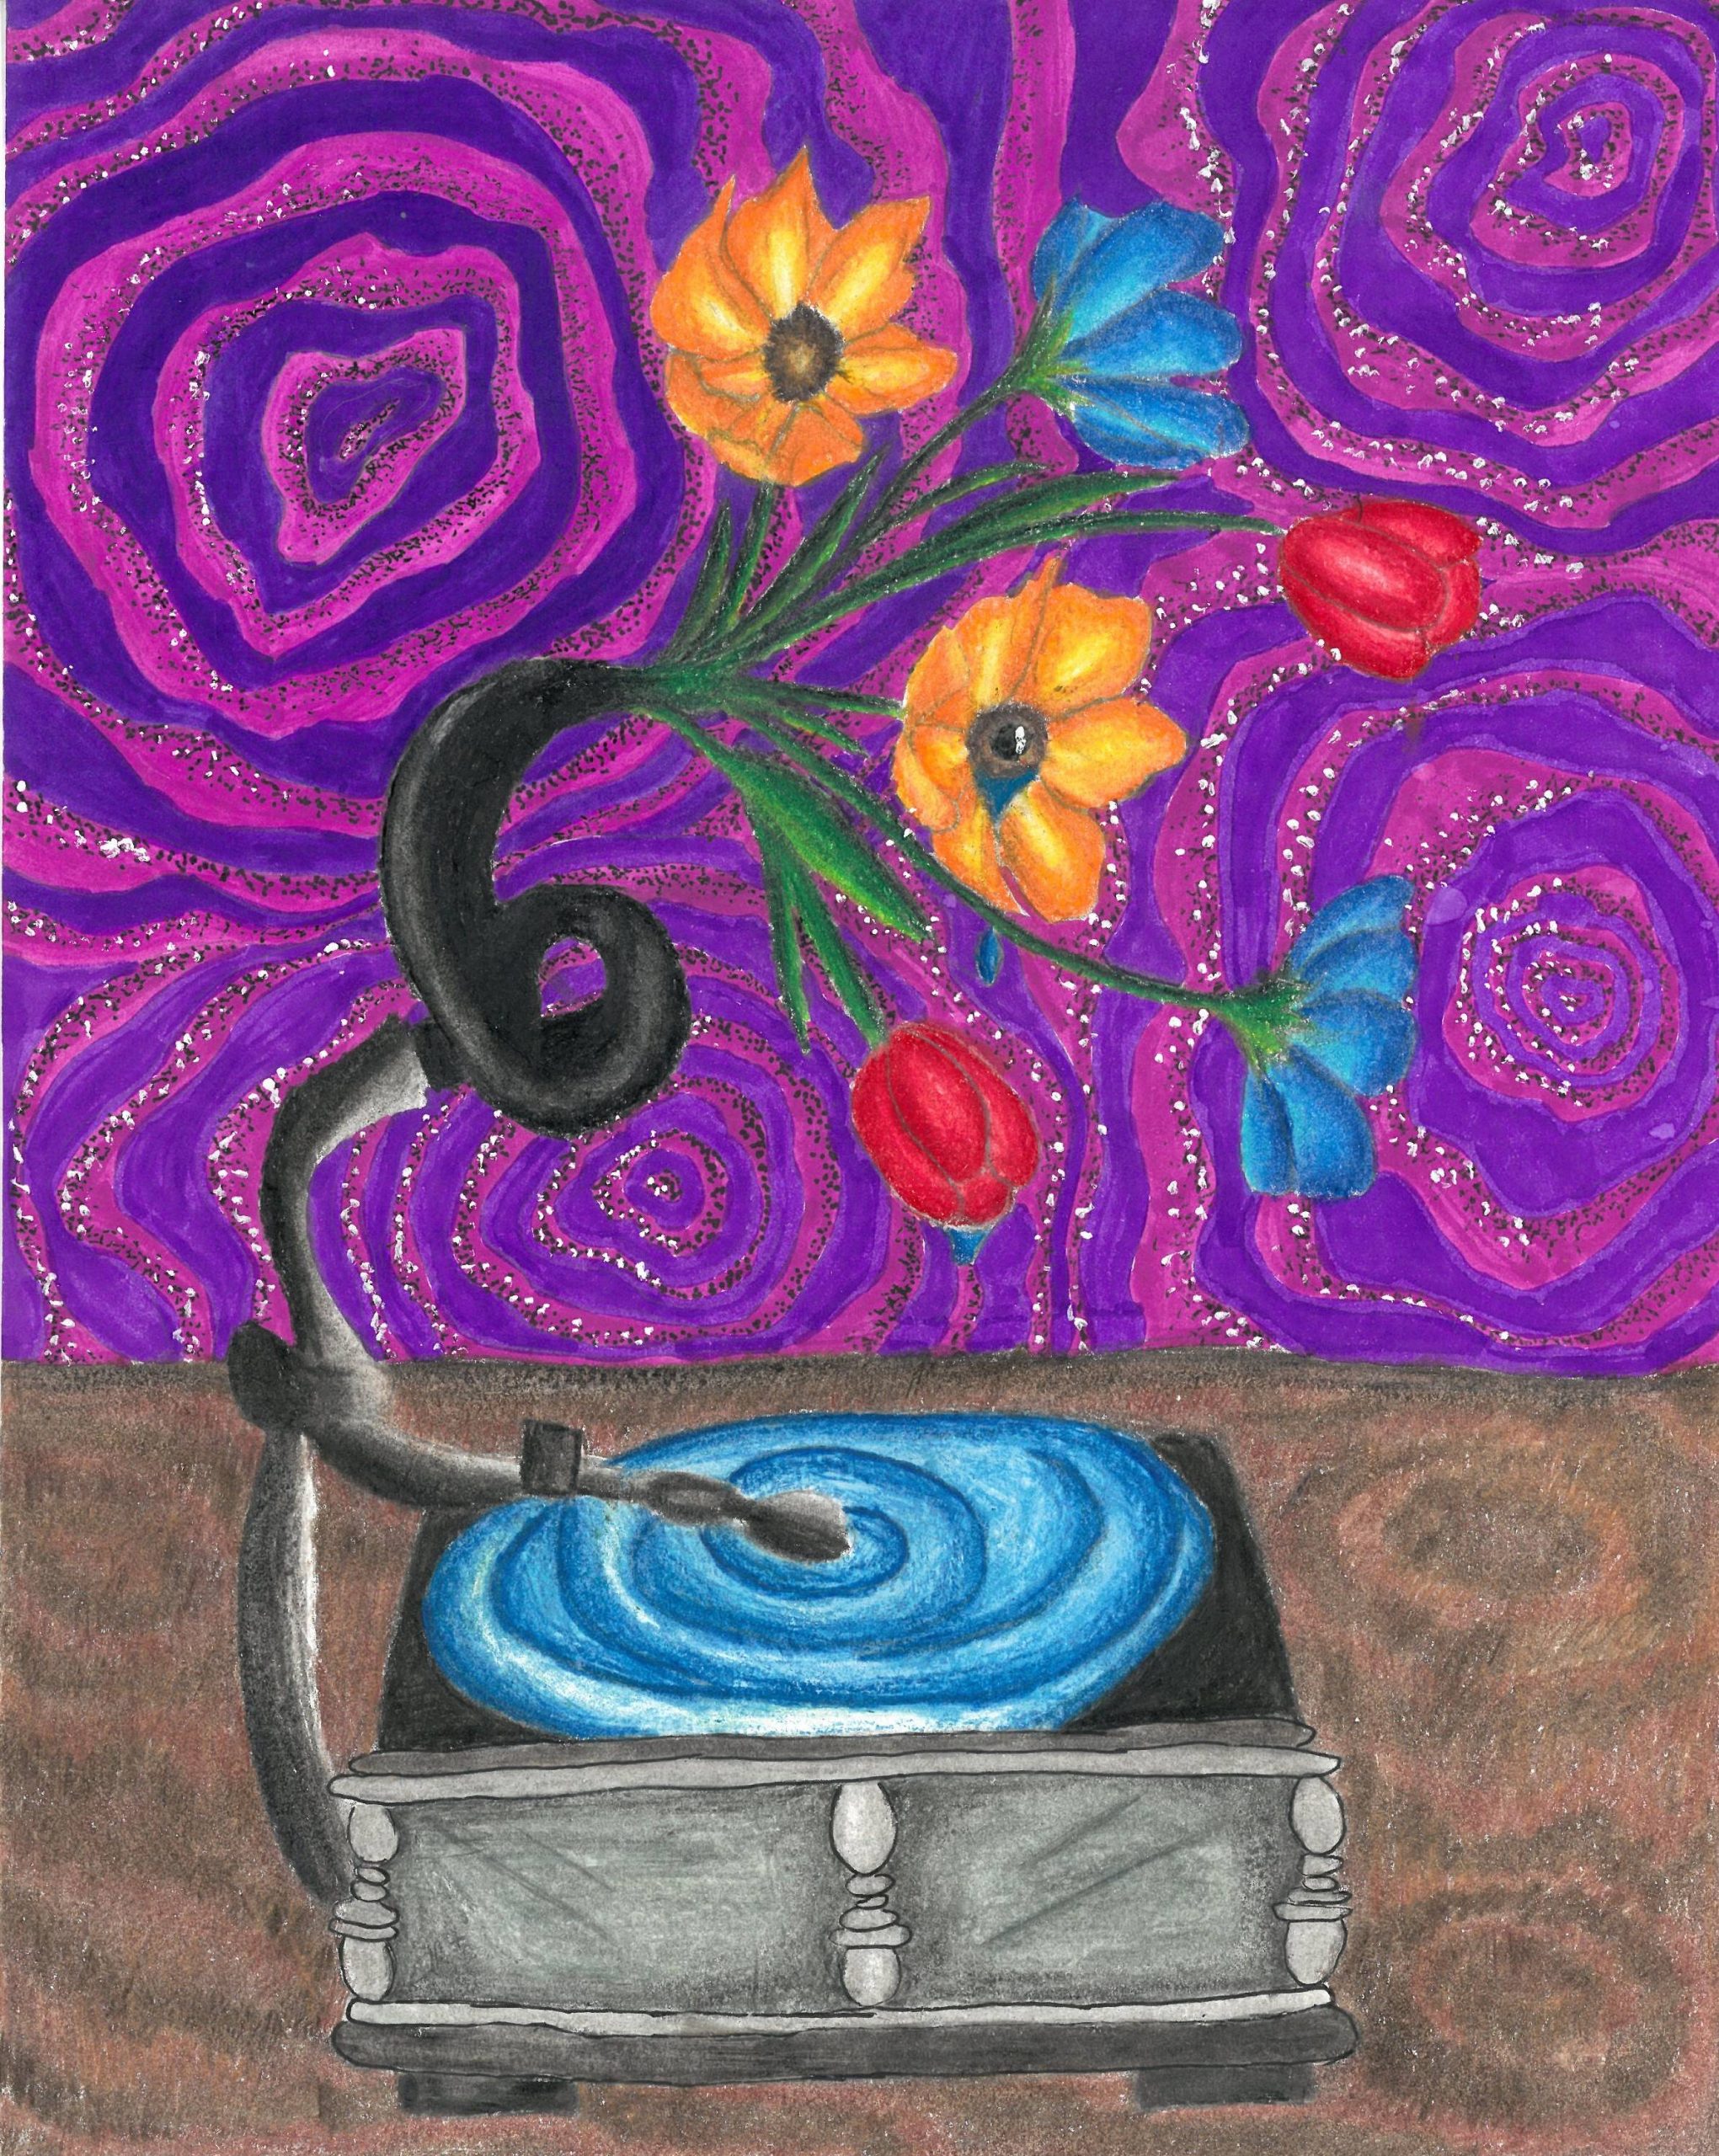 Student Surrealist Art Exhibit, The Blooming Sound of Nature  
By Chloe Wilson 
